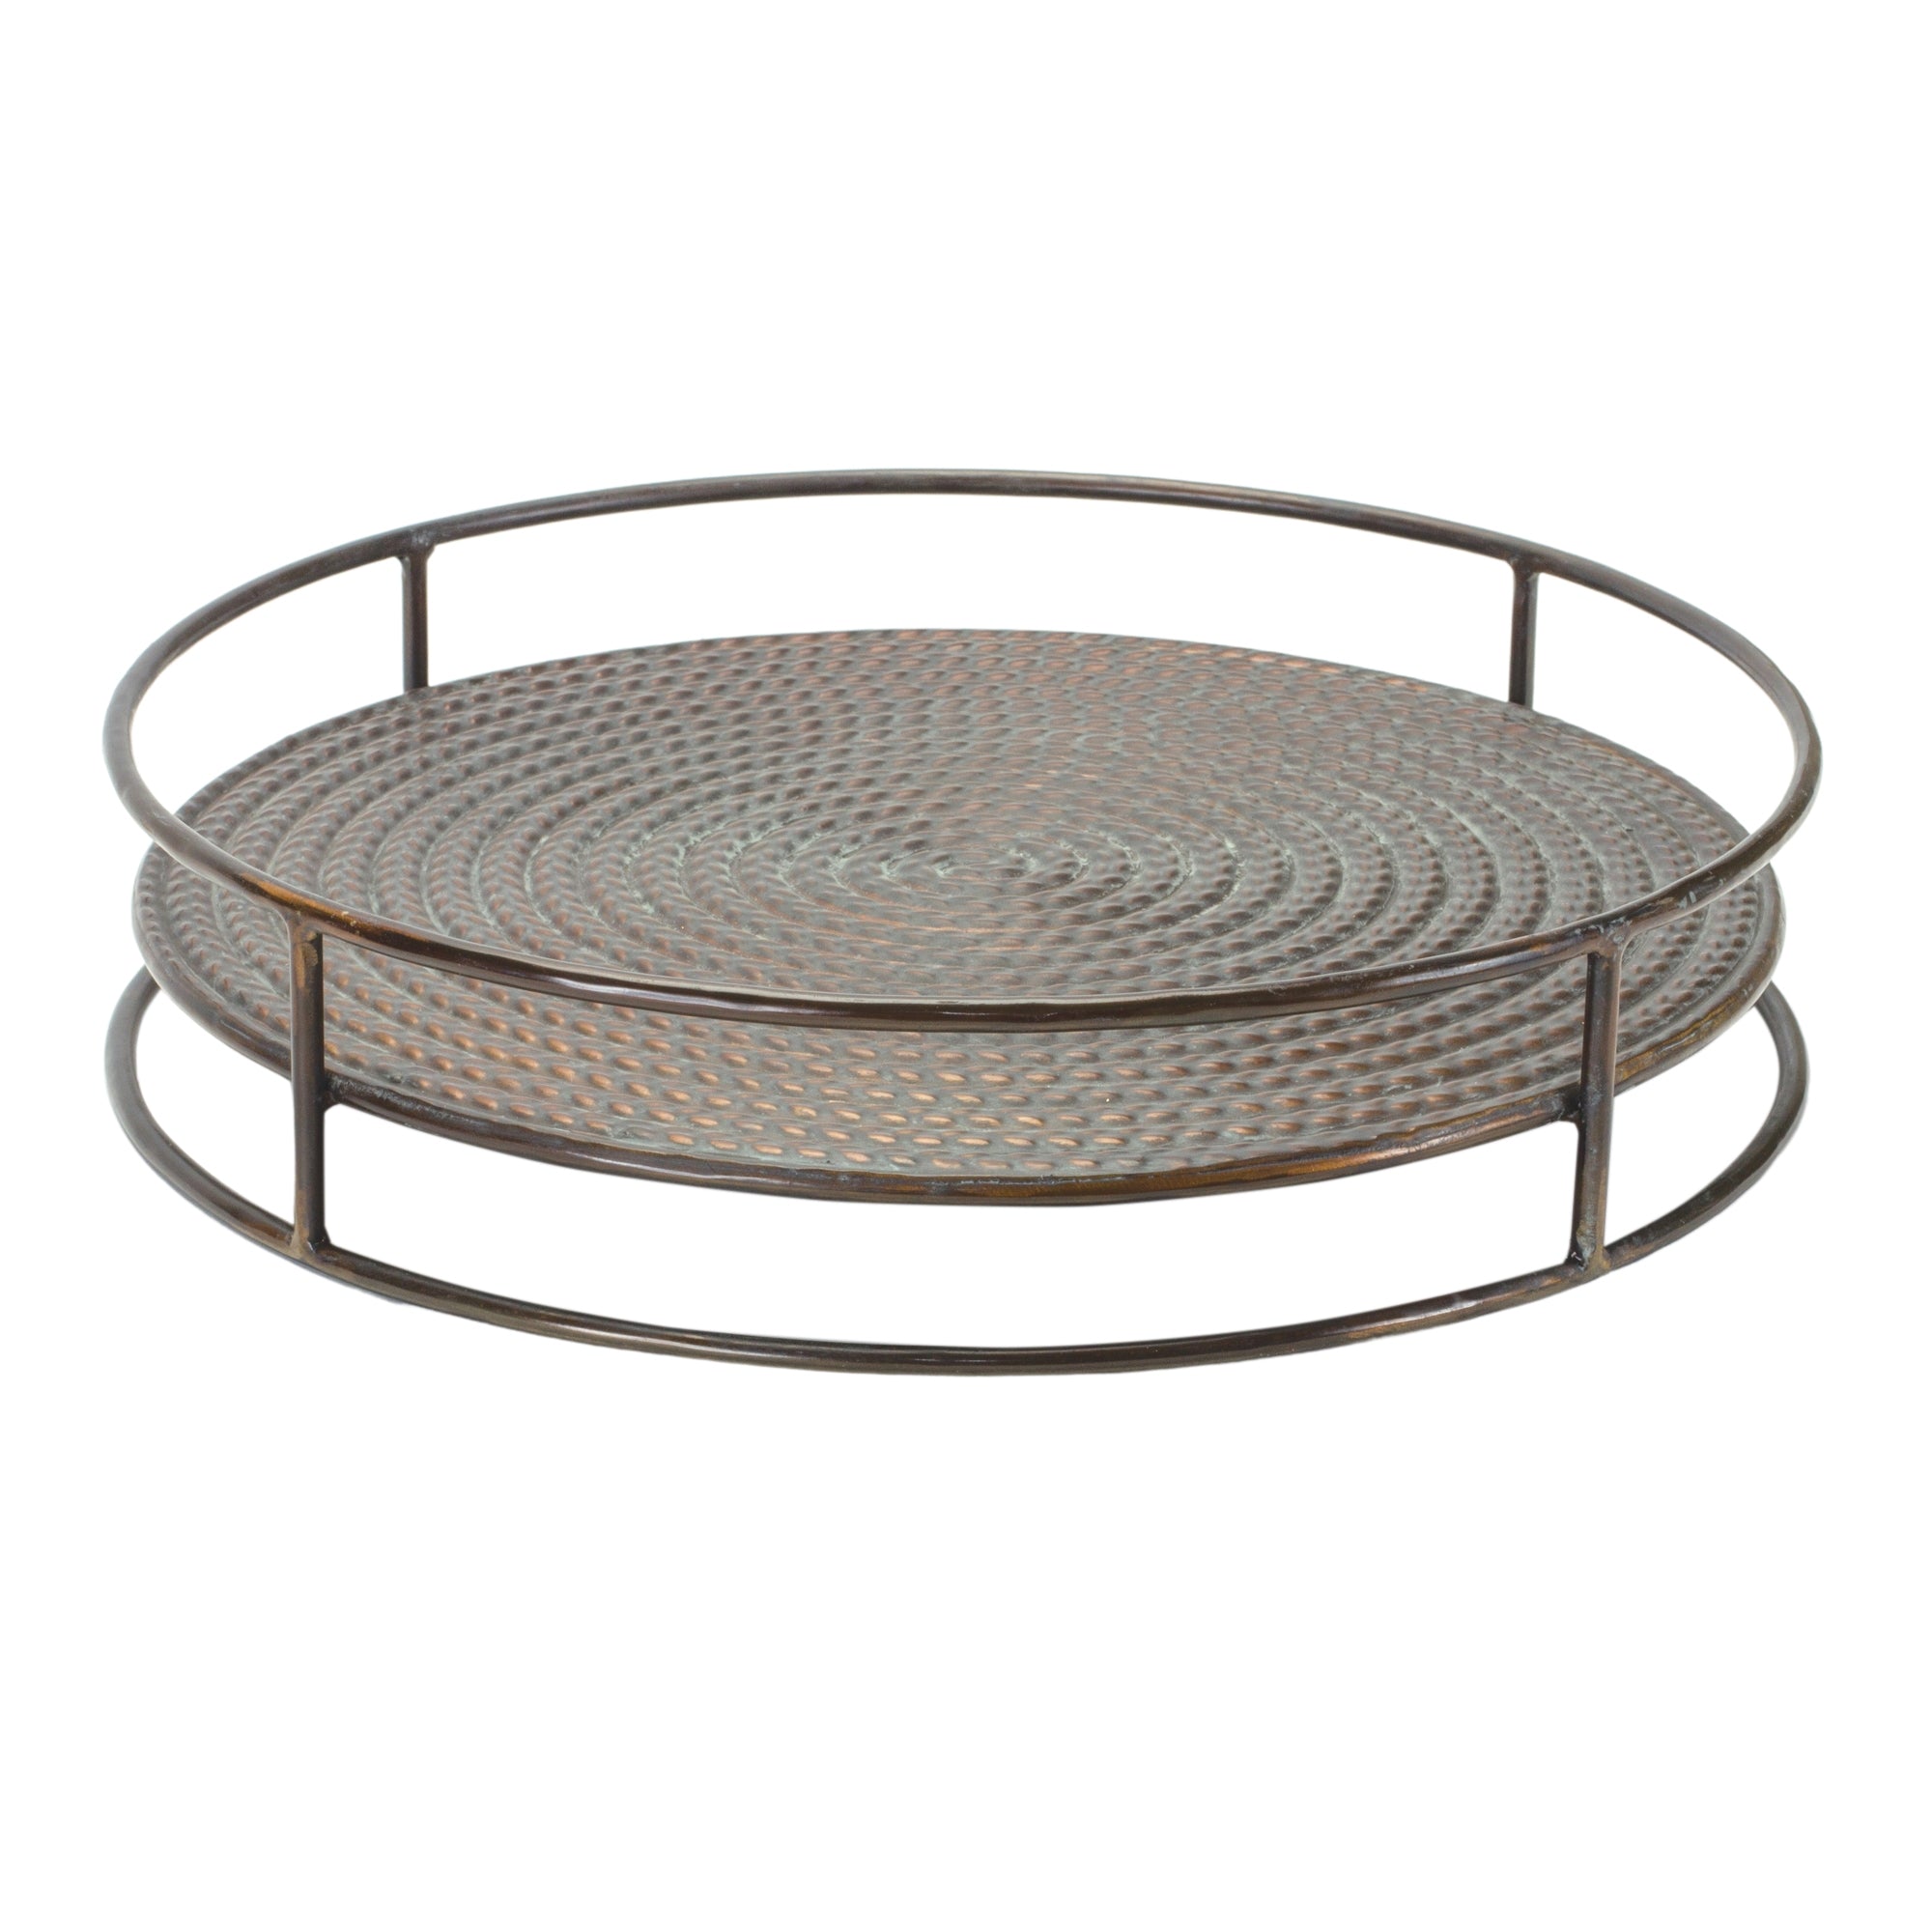 Round-Hammered-Metal-Tray-with-Bronze-Finish-Decorative-Trays